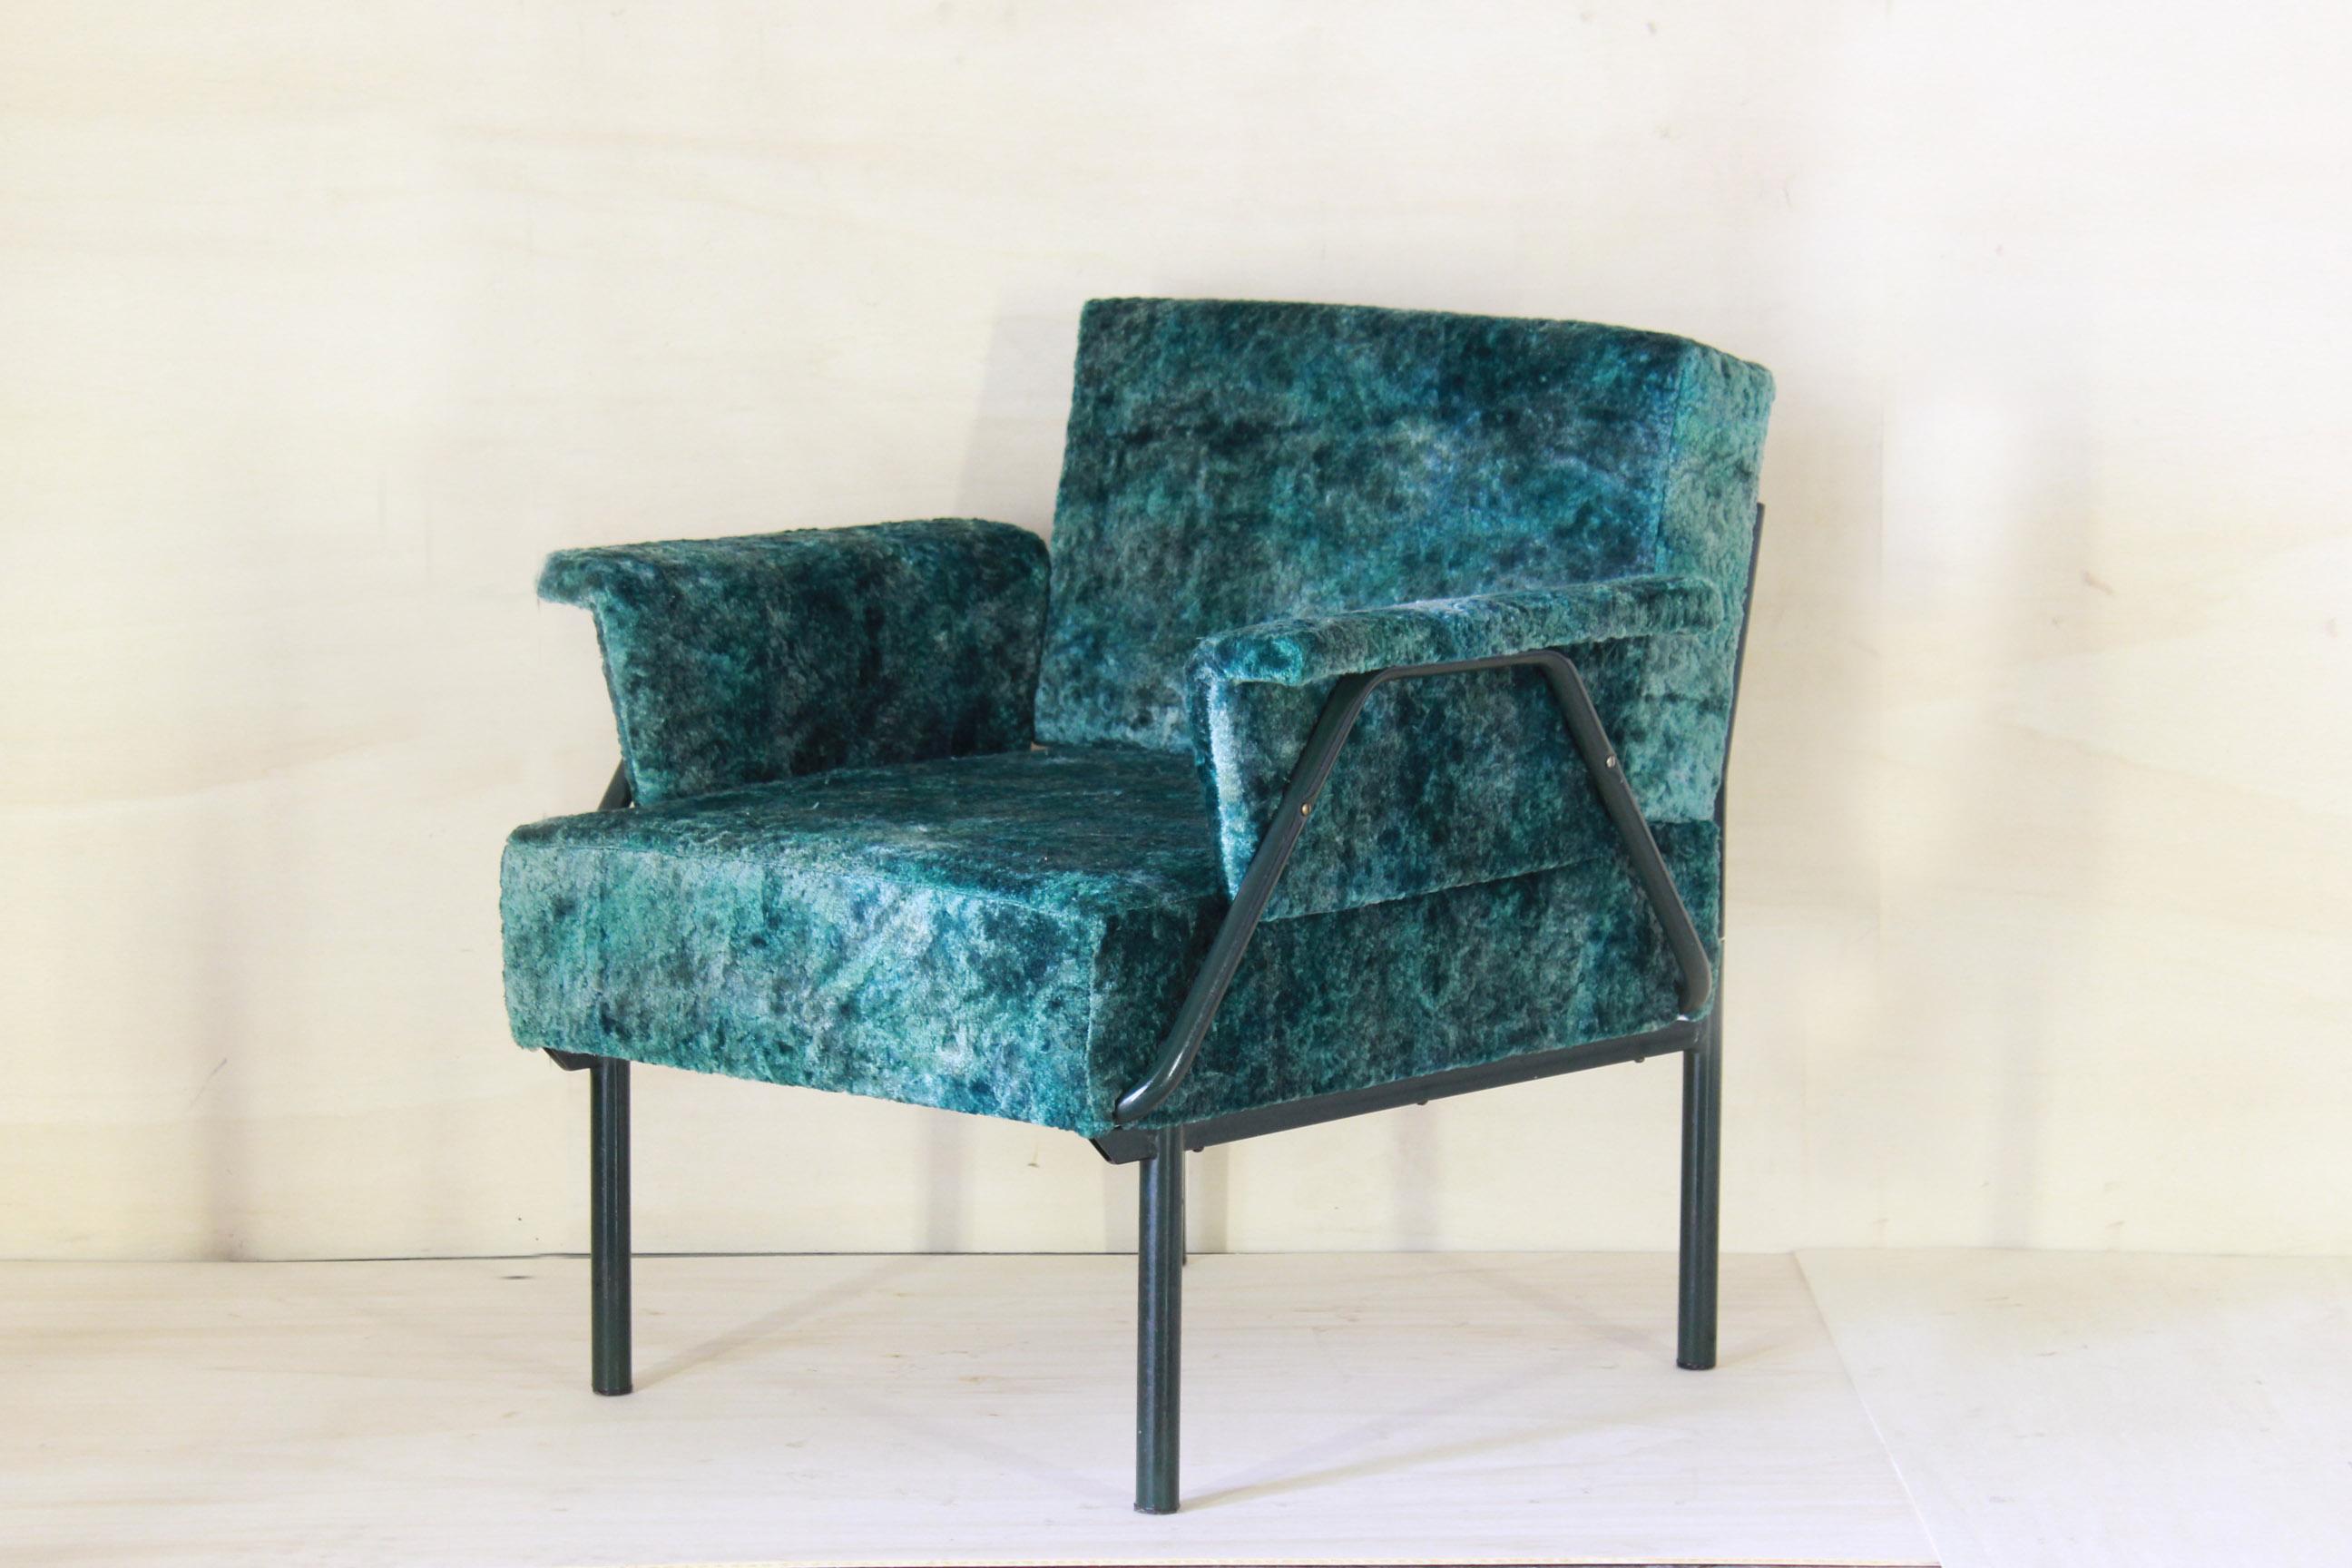 A 1970s vintage armchair with green fabric cover and iron structure. The filling and the fabric are brand new ones. In excellent conditions with only few signs of time of the tubular iron frame.